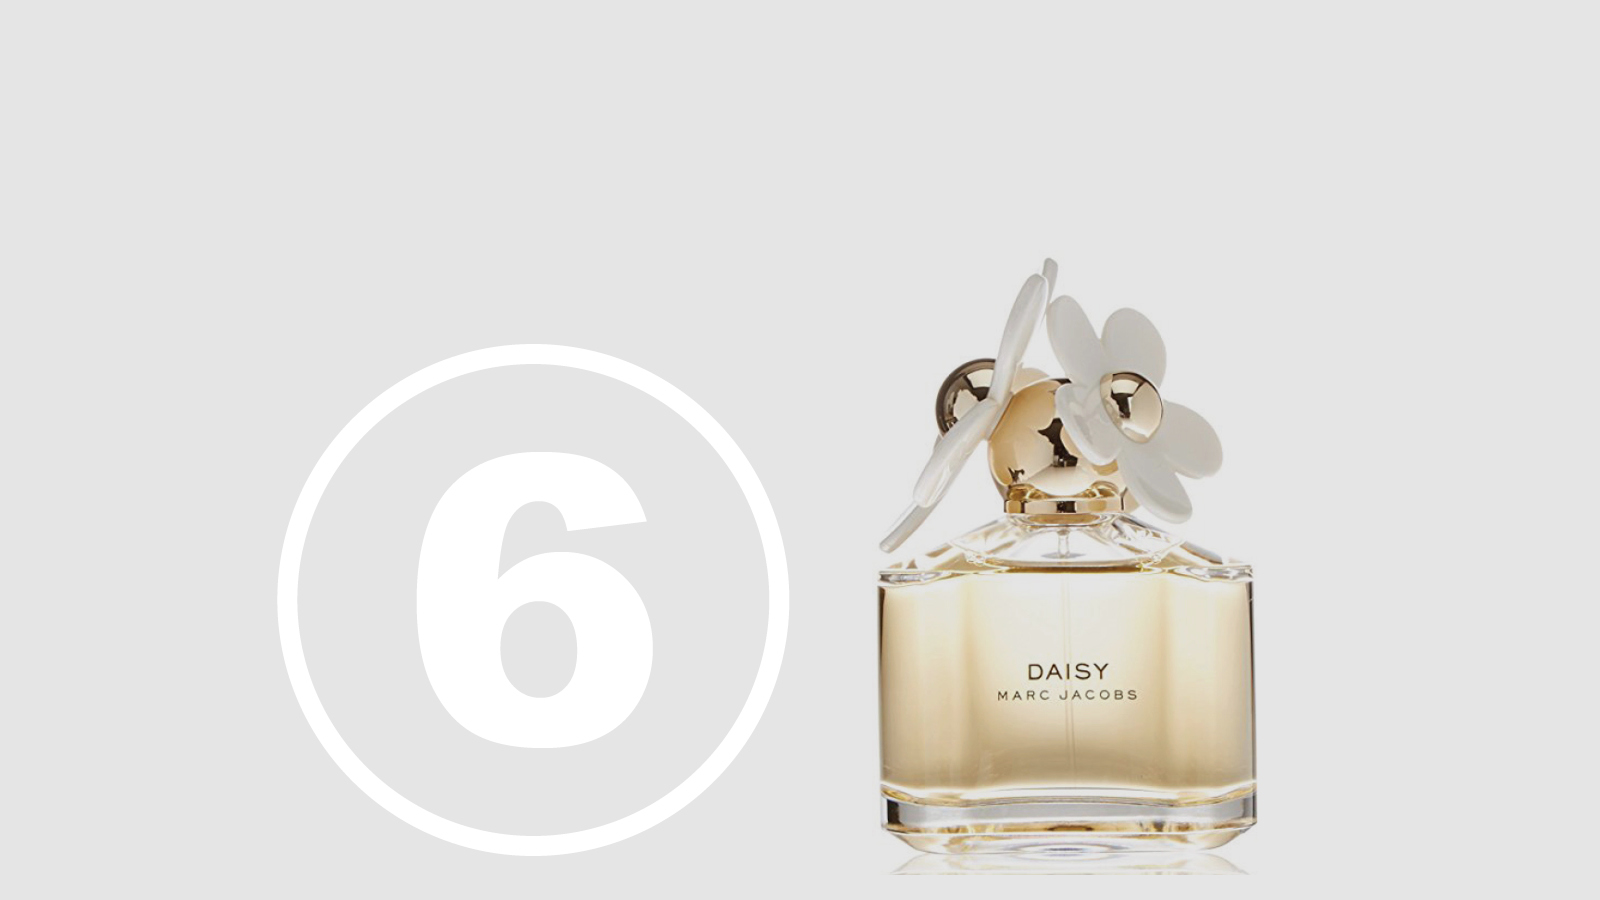 <h5>Top Ten Most Hazardous Products</h5><h4>Marc Jacobs Daisy Perfume</h4><p>Another Coty fragrance that carries the famous designer’s name and uses beatific, radiant young girls in its marketing campaigns.<br />We found <span class="highlight">14 chemicals</span> chemicals linked to chronic health effects with <span class="highlight">100% hidden in "fragrance."</span></p>